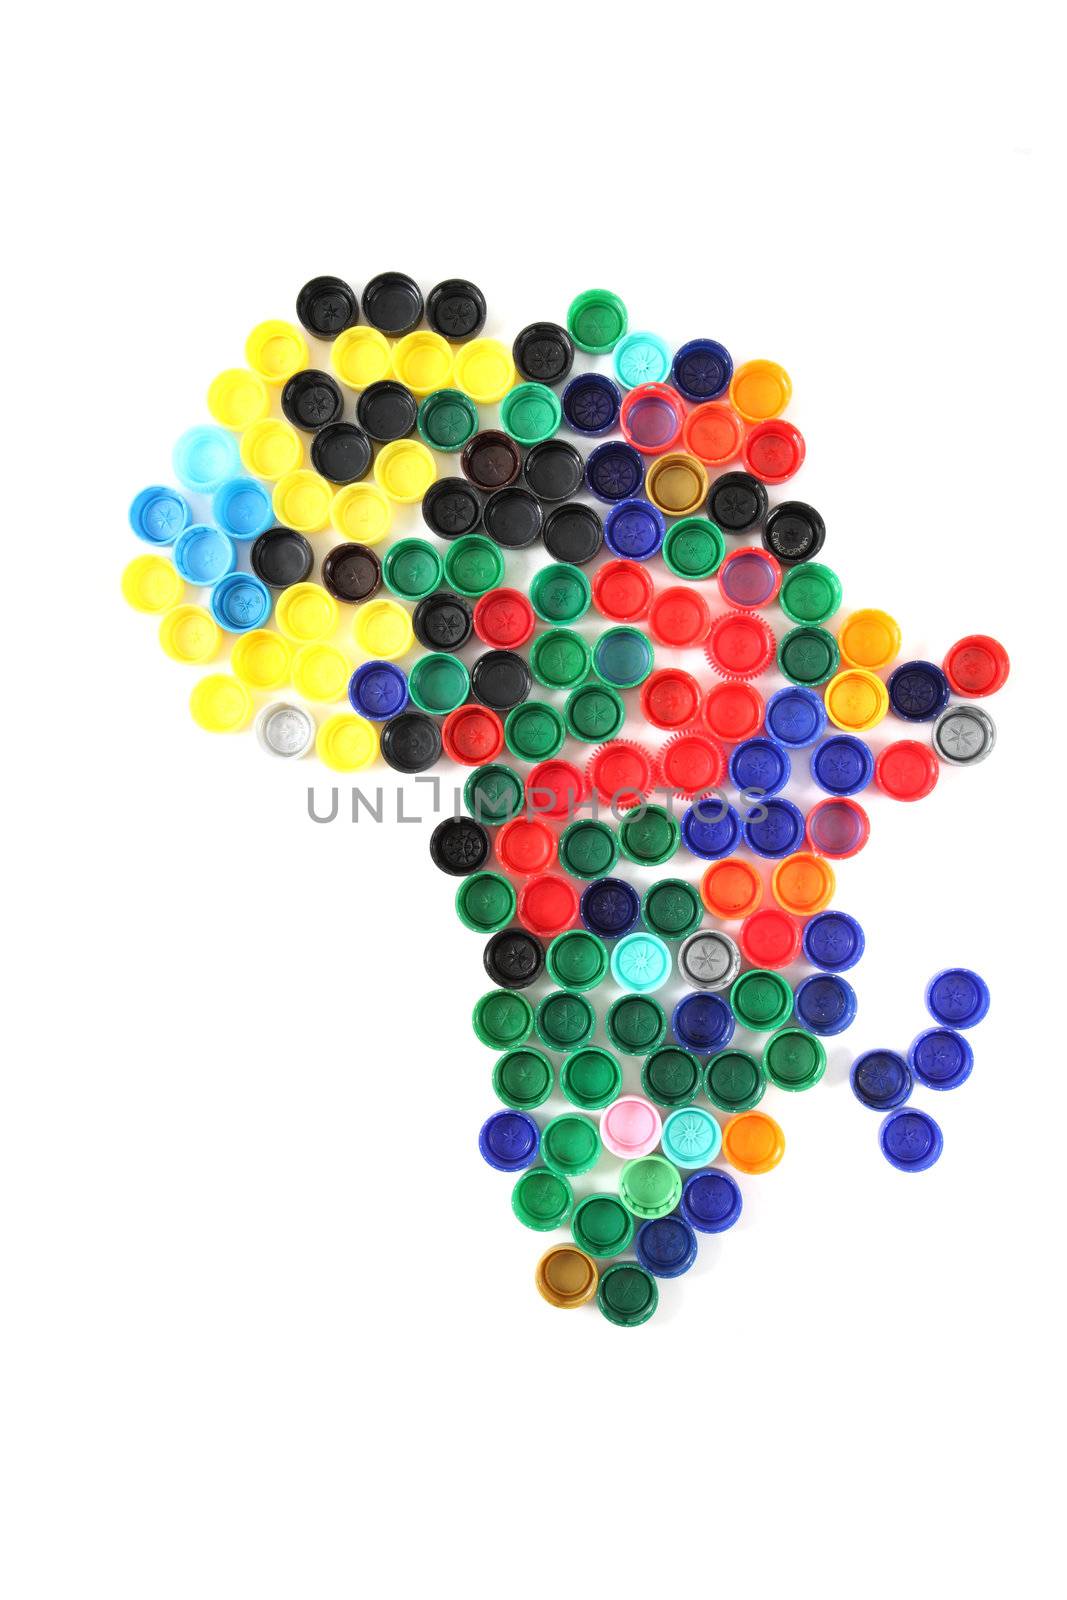 africa from the color caps isolated on the white background